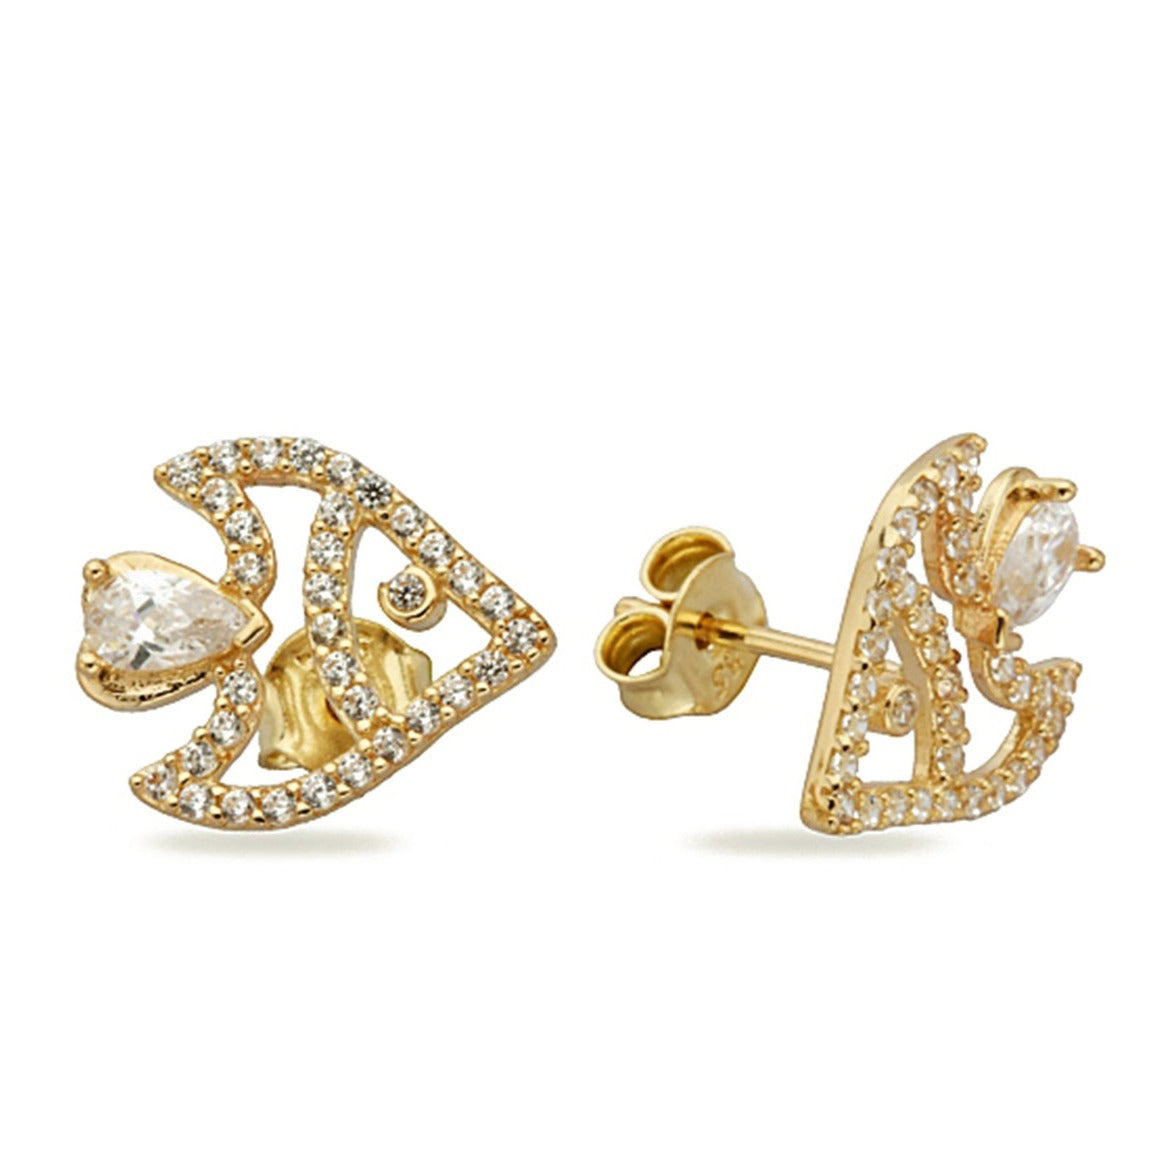 The "14K Gold CZ Fish Stud Earrings" are adorable and whimsical accessories that add a playful touch to any ensemble. 